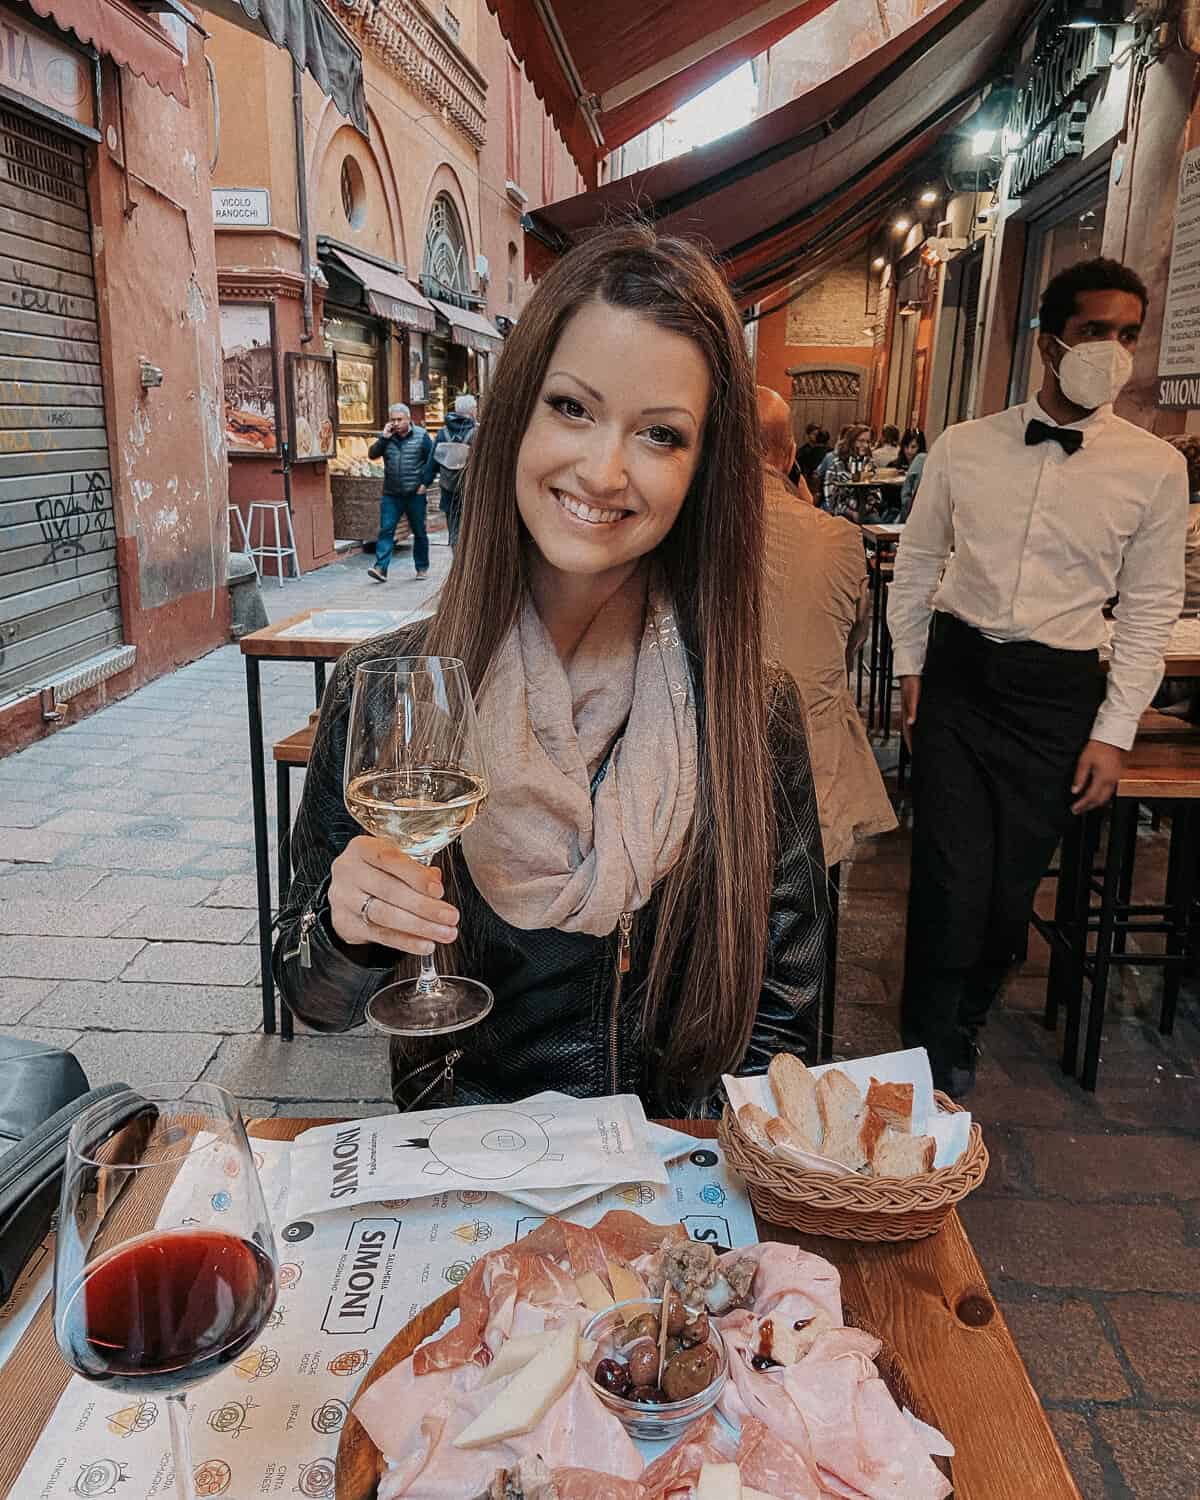 A woman seated outdoors at a European bistro, smiling as she enjoys a glass of white wine and a platter of cured meats and olives, with the ambient hustle of the alley and a waiter in the background adding to the urban dining atmosphere.